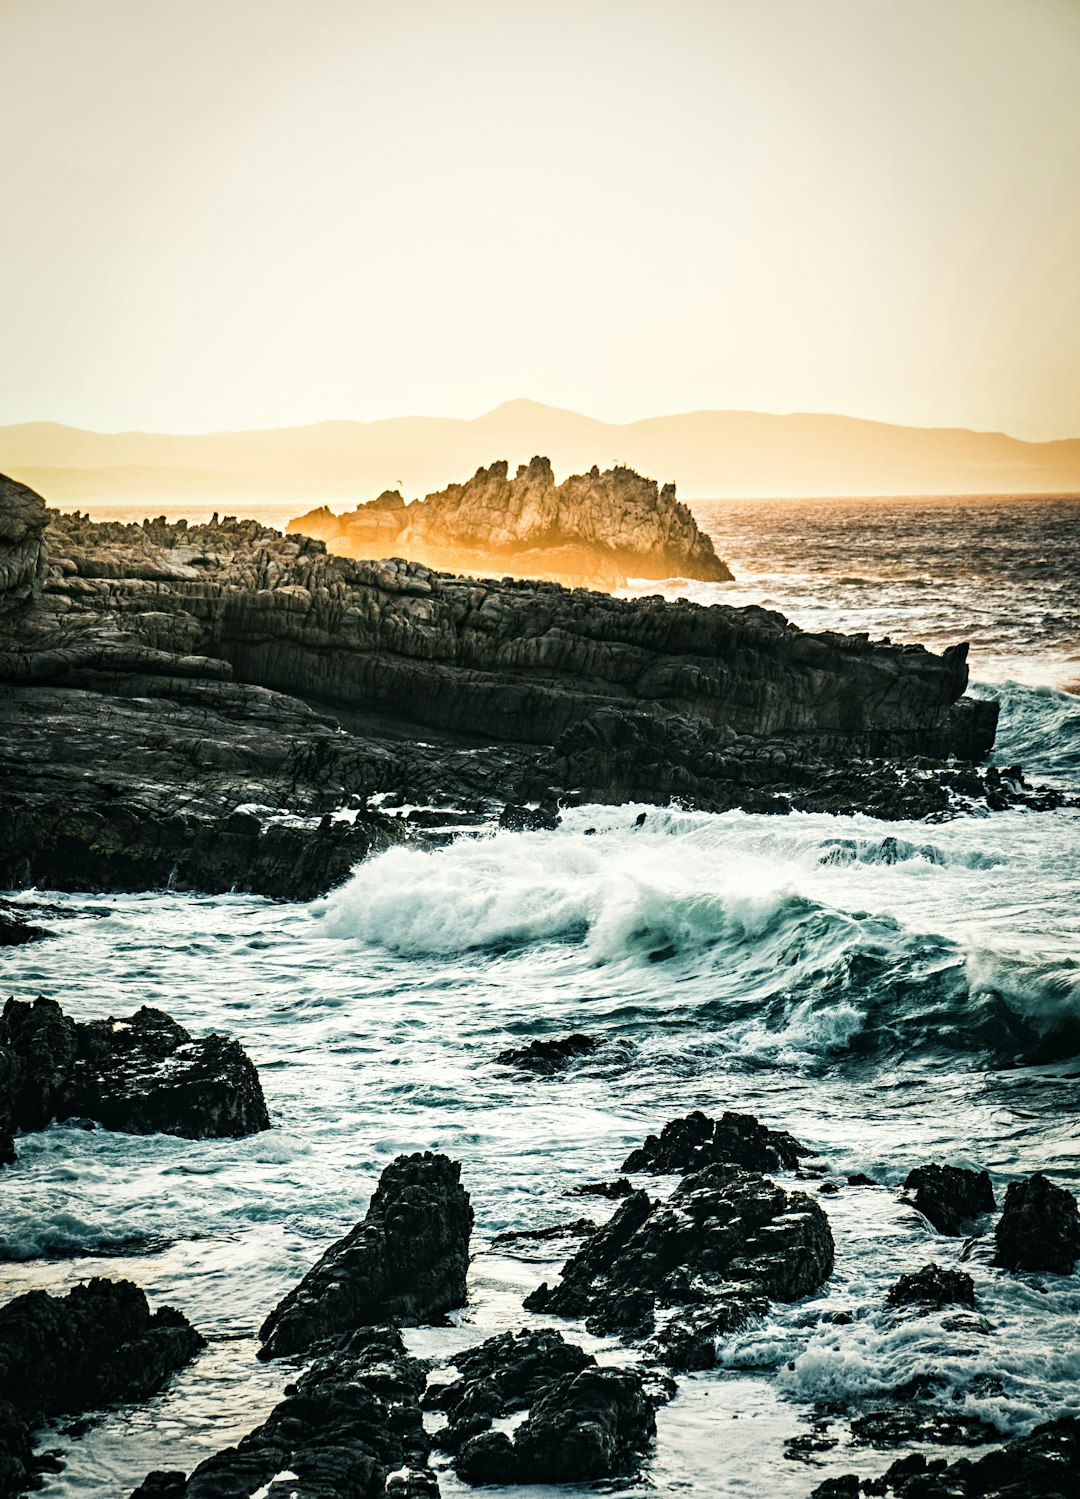 Travel Tips and Stories of Hermanus in South Africa